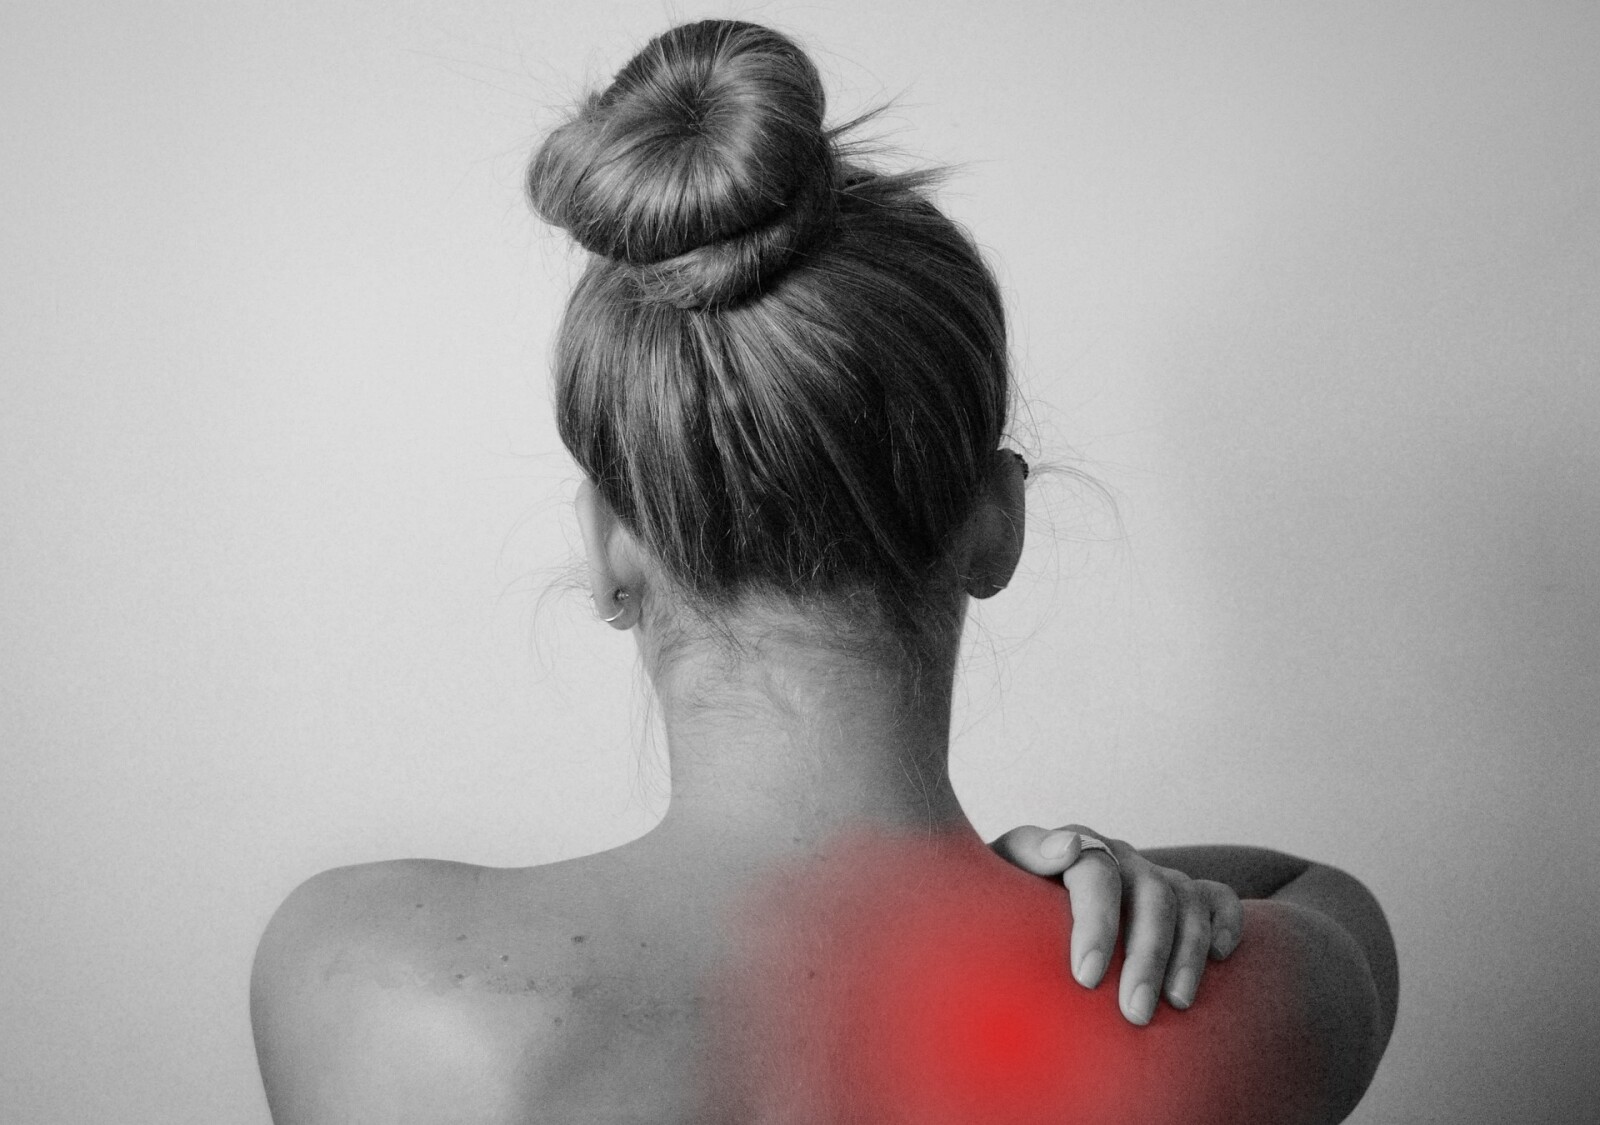 What are the 5 signs of inflammation?